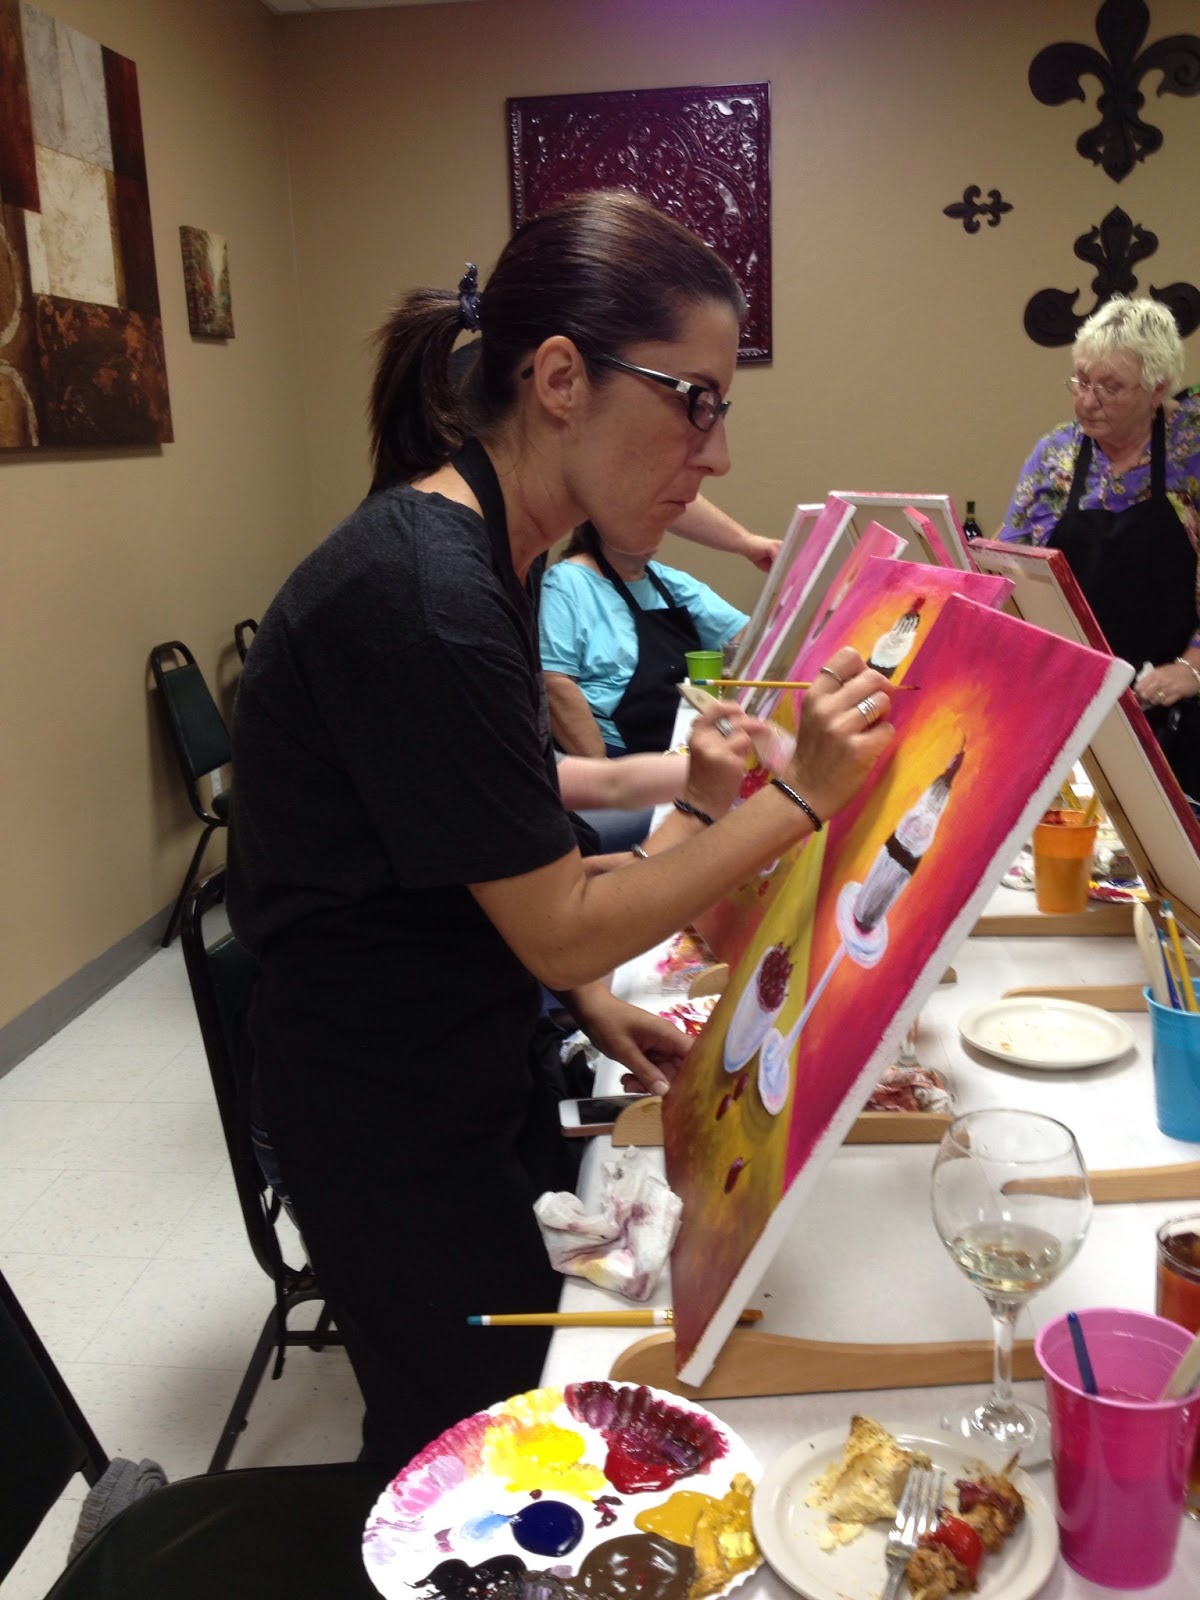 Confessions of a PaintnSip instructor.